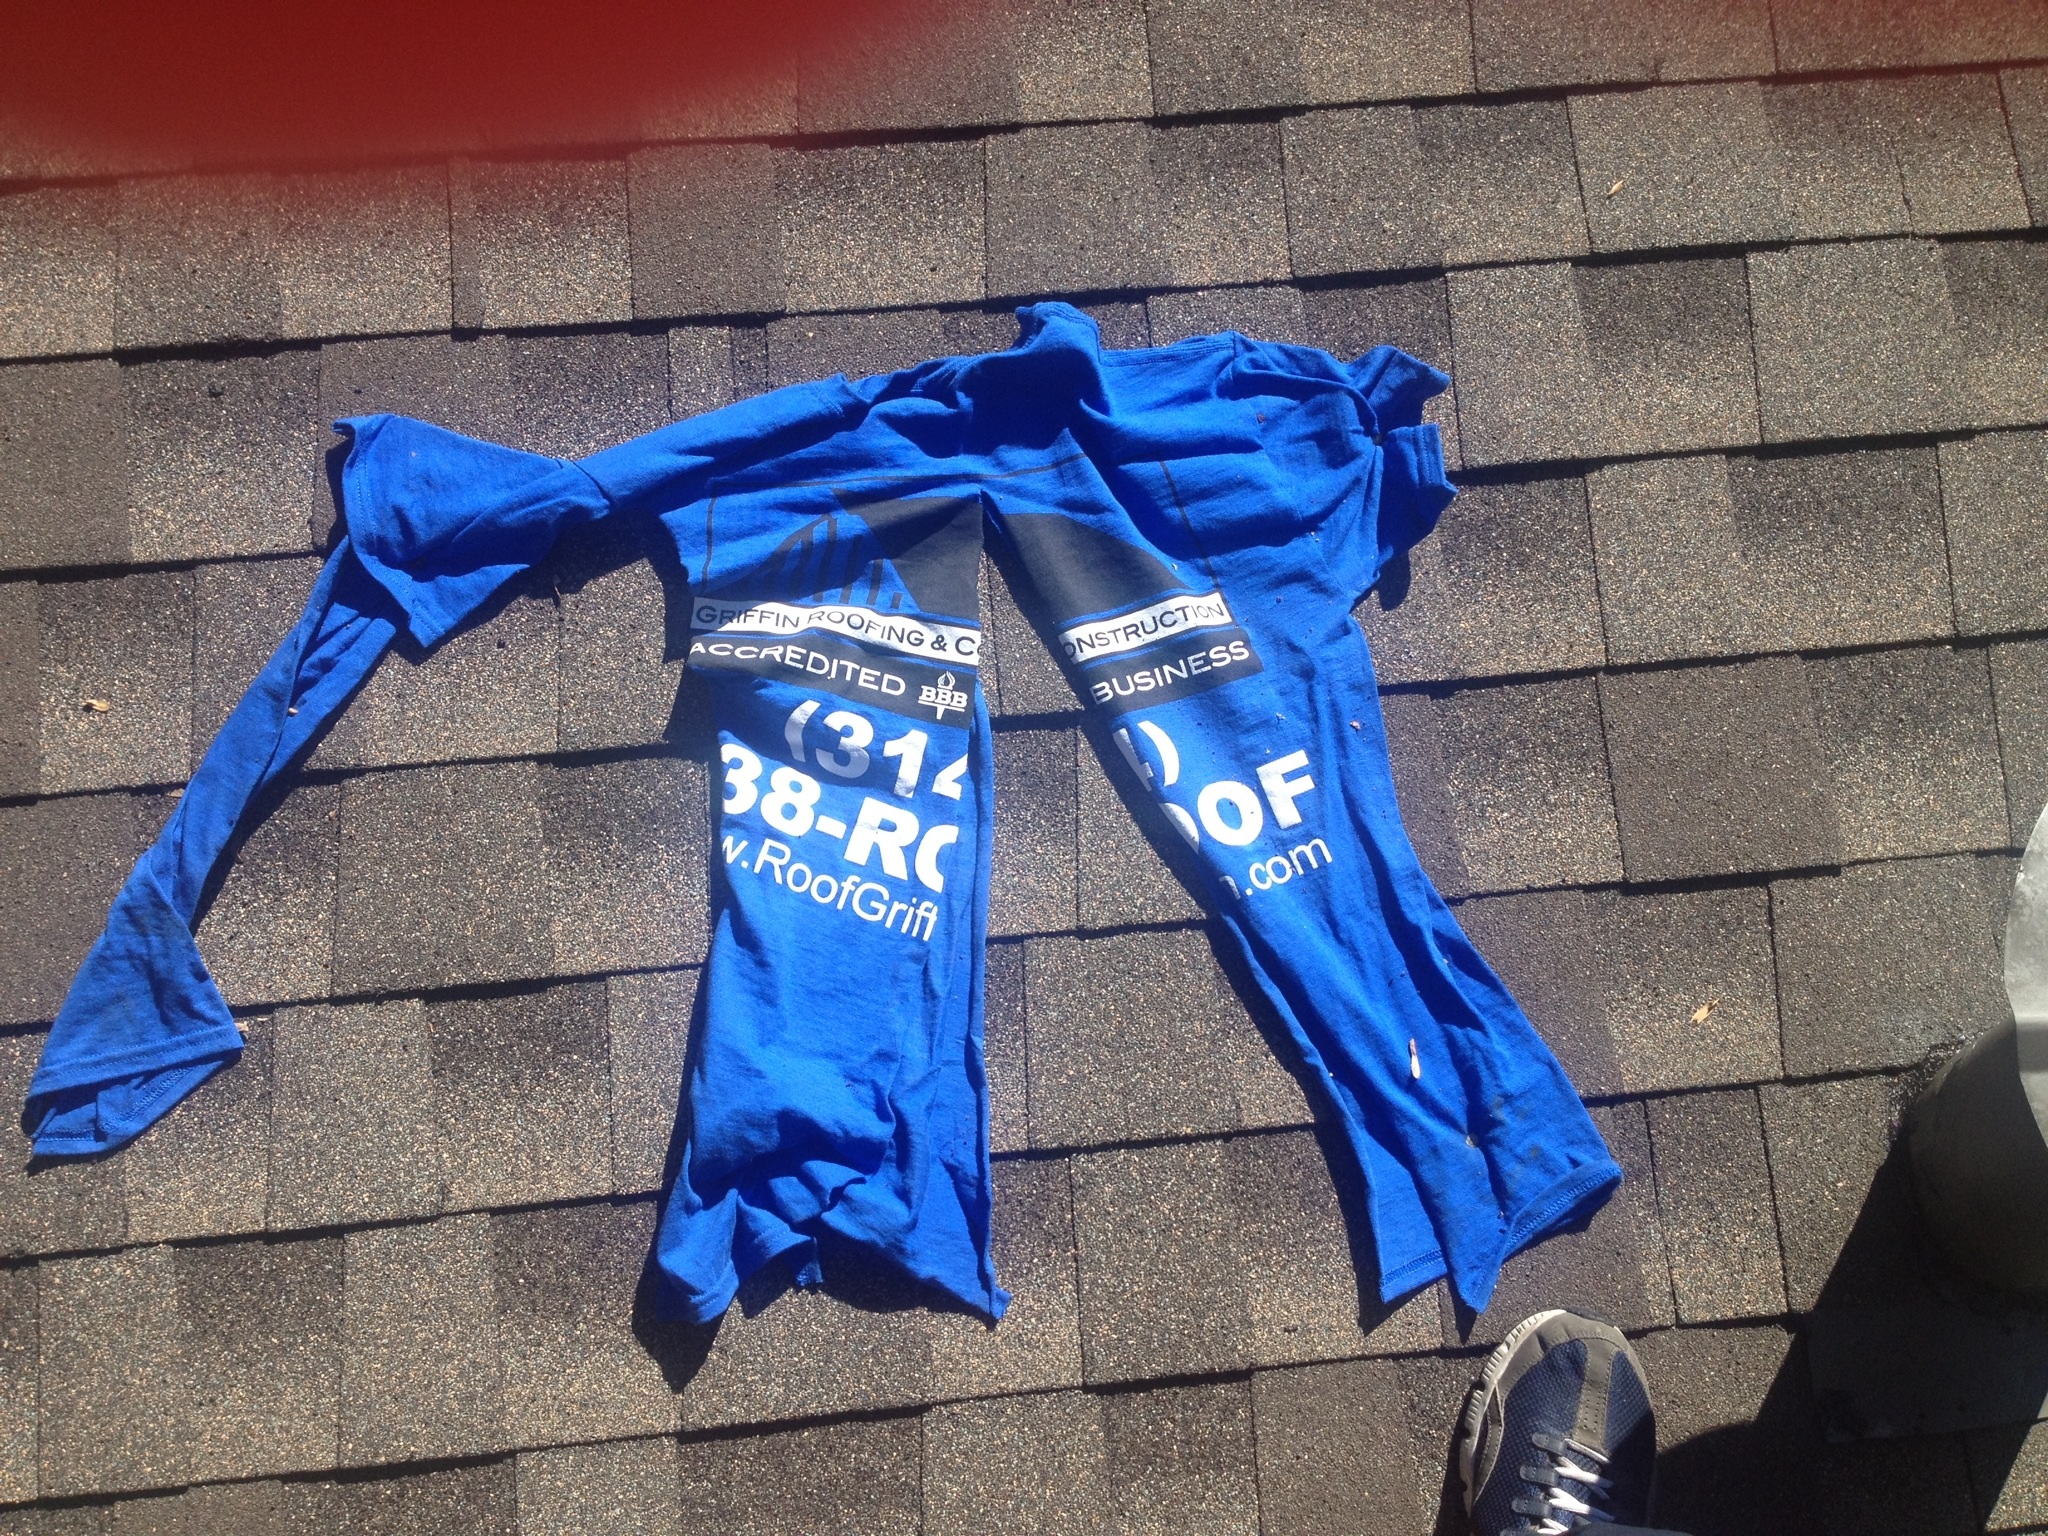 Roofers came back to my house and left this and took off part of my roof